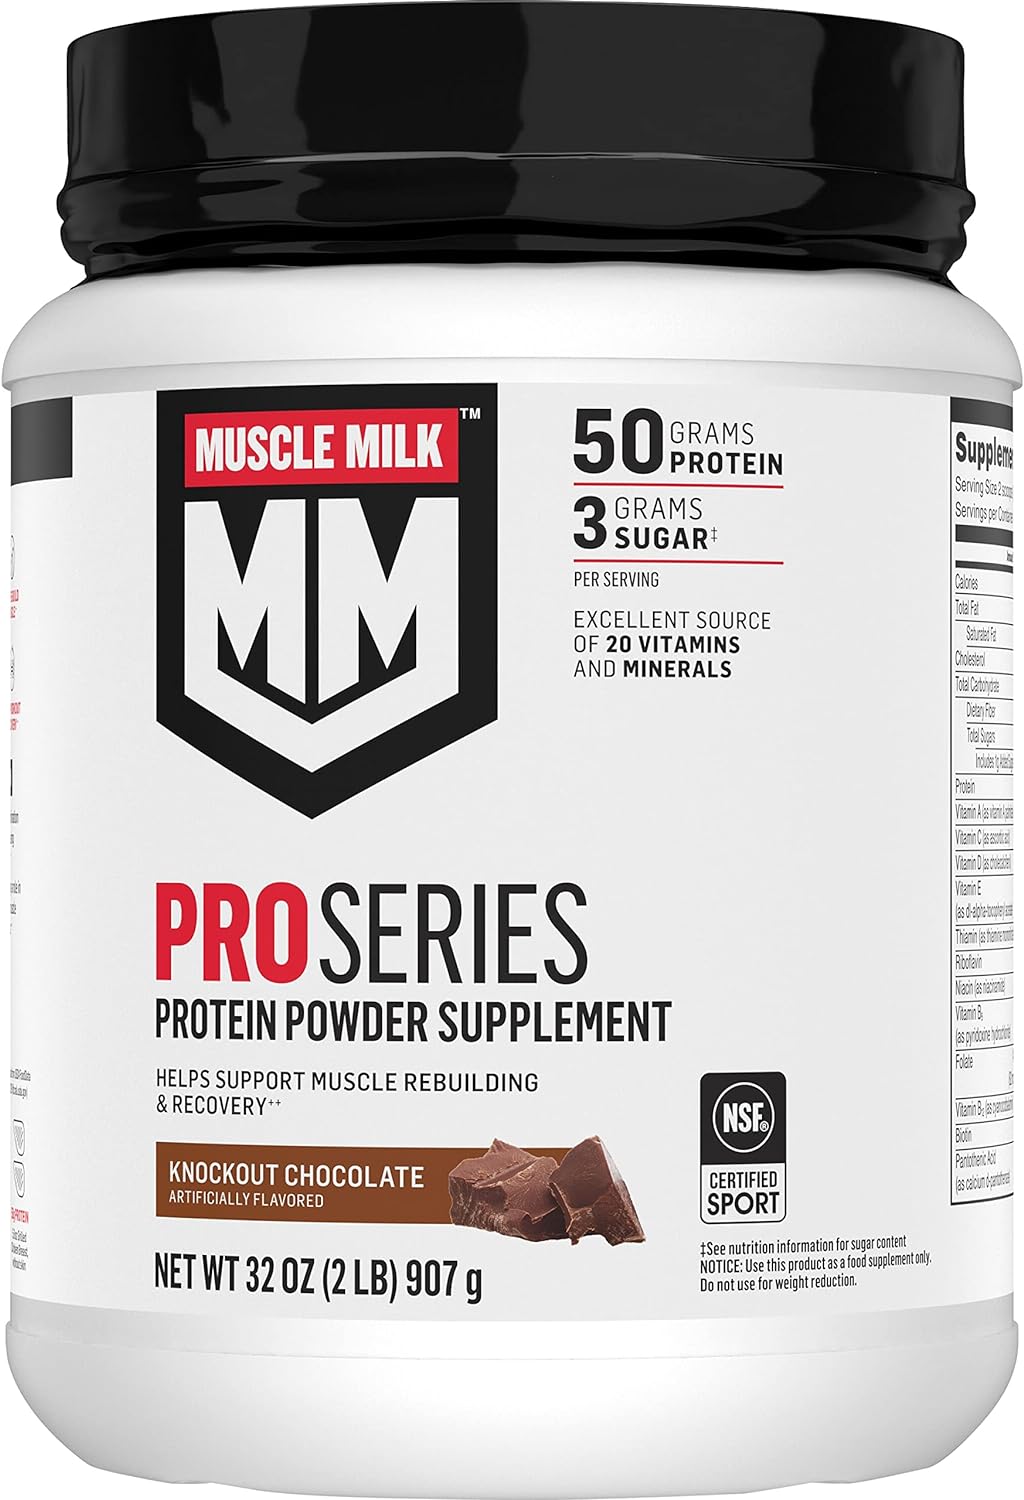 Muscle Milk Pro Series Protein Powder Supplement,Knockout Chocolate,2 Pound,11 Servings,50g Protein,3g Sugar,20 Vitamins & Minerals,NSF Certified for Sport,Workout Recovery,Packaging May Vary